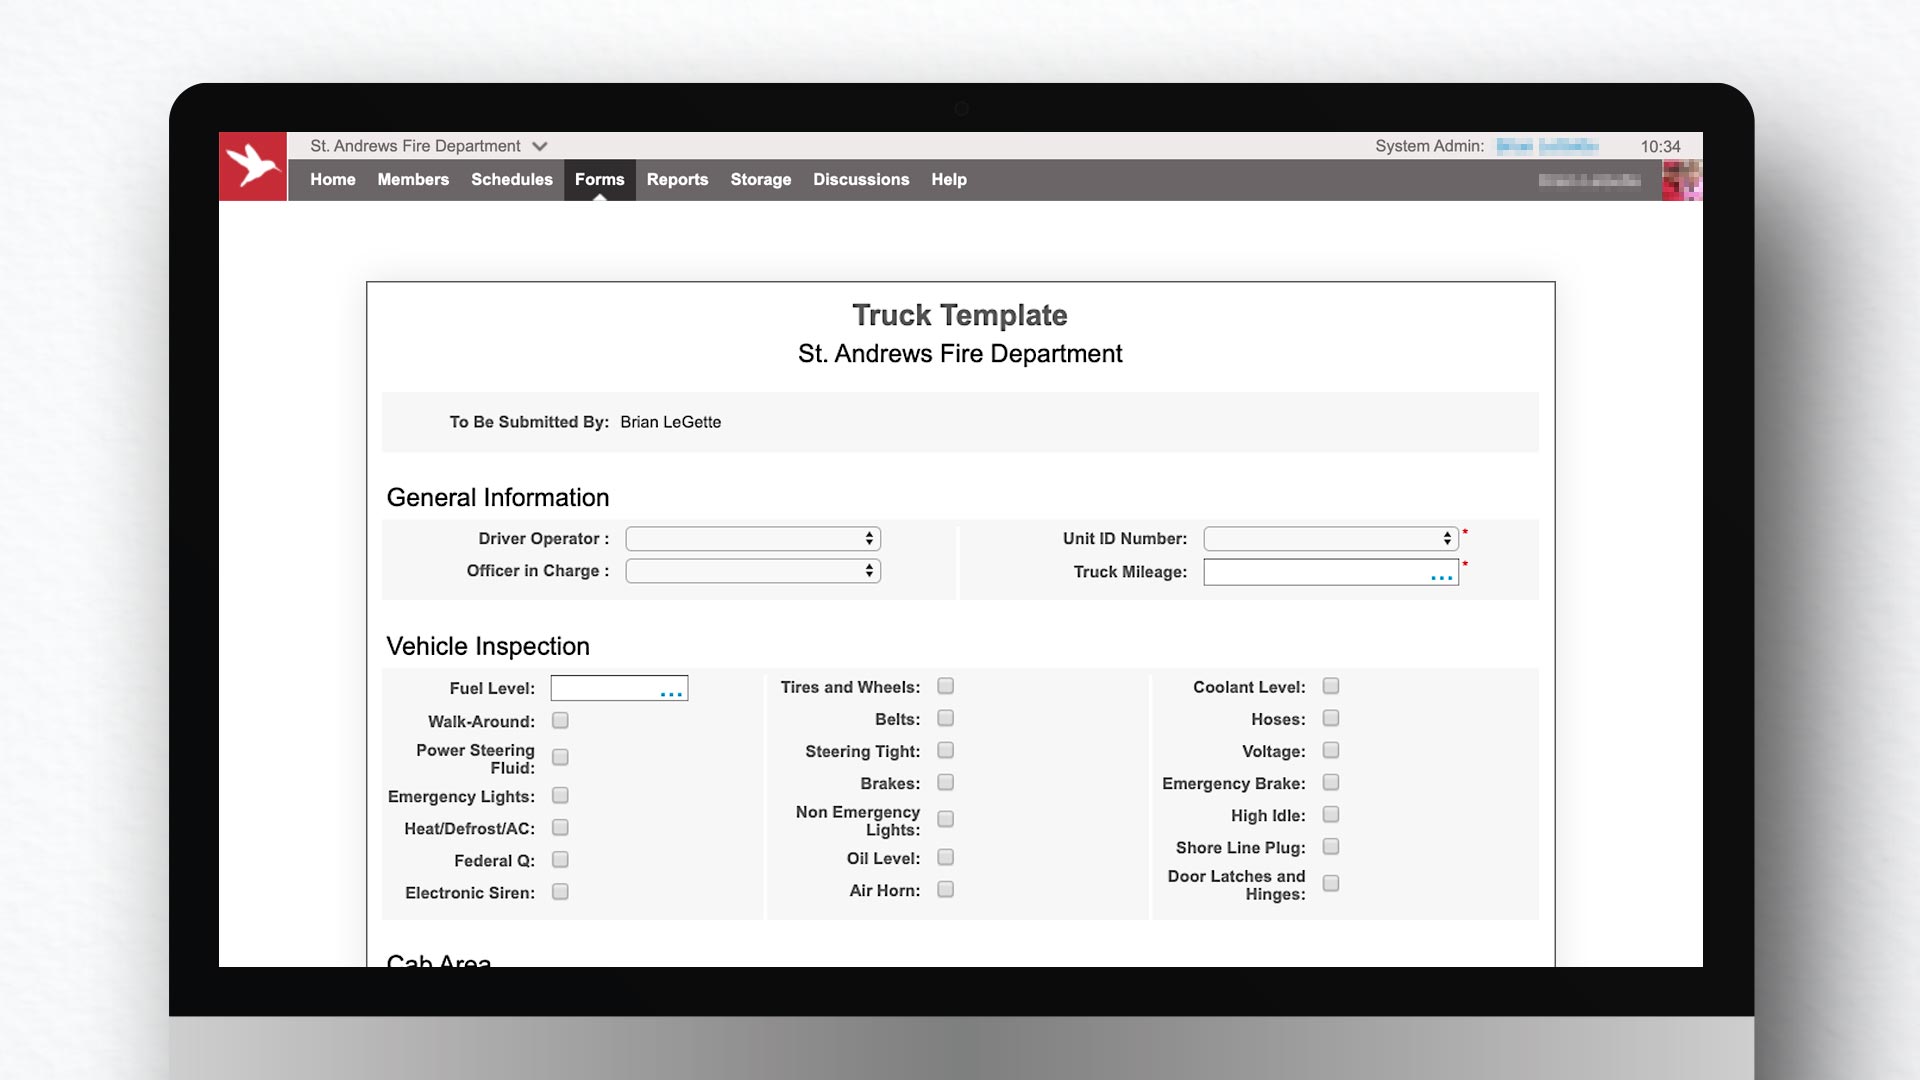 Go paperless with Aladtec's Forms feature